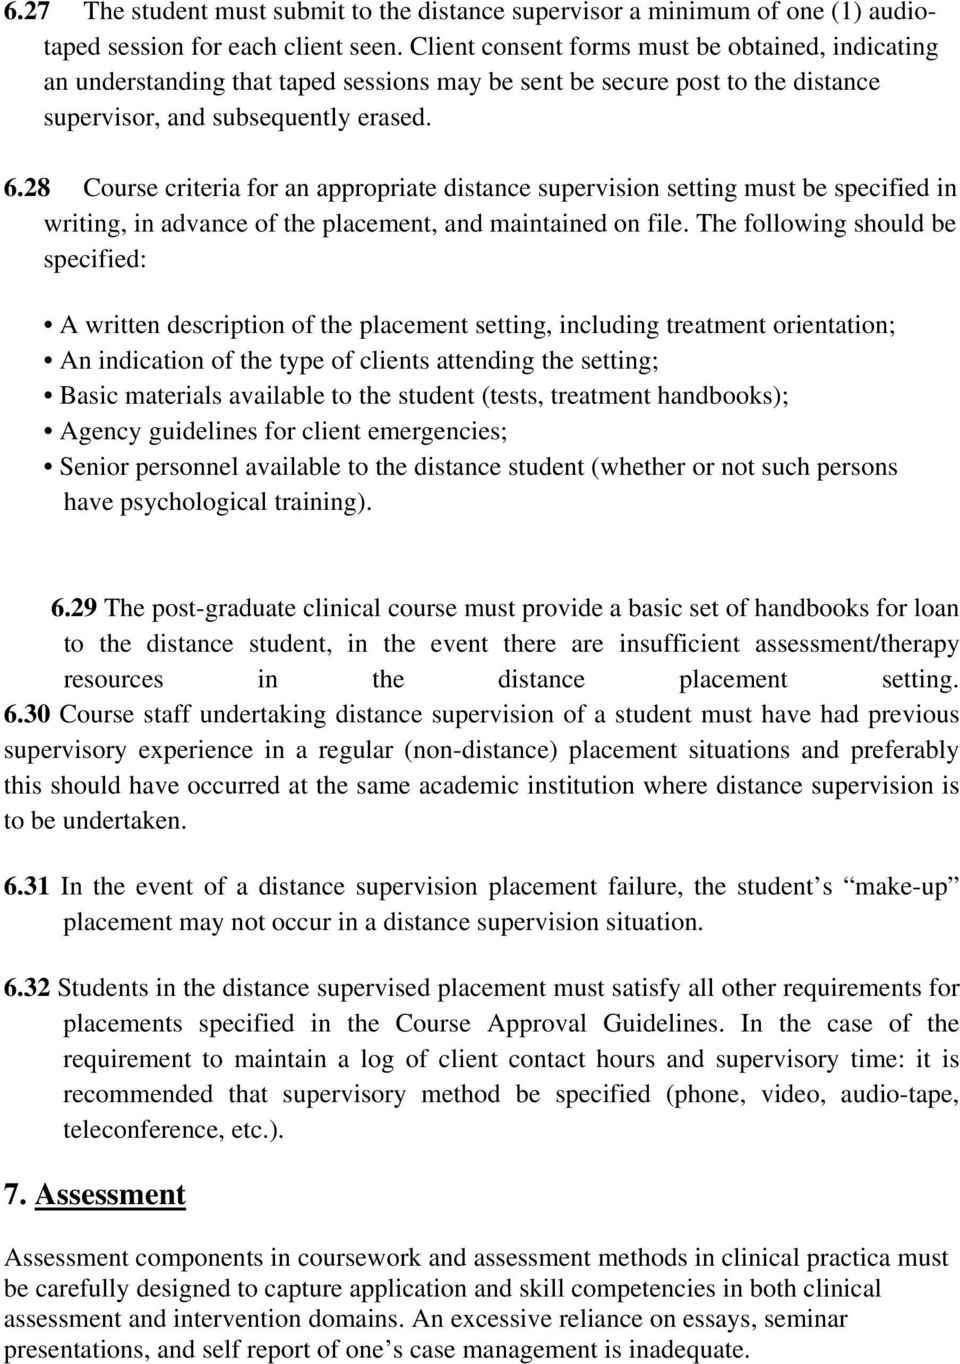 28 Course criteria for an appropriate distance supervision setting must be specified in writing, in advance of the placement, and maintained on file.